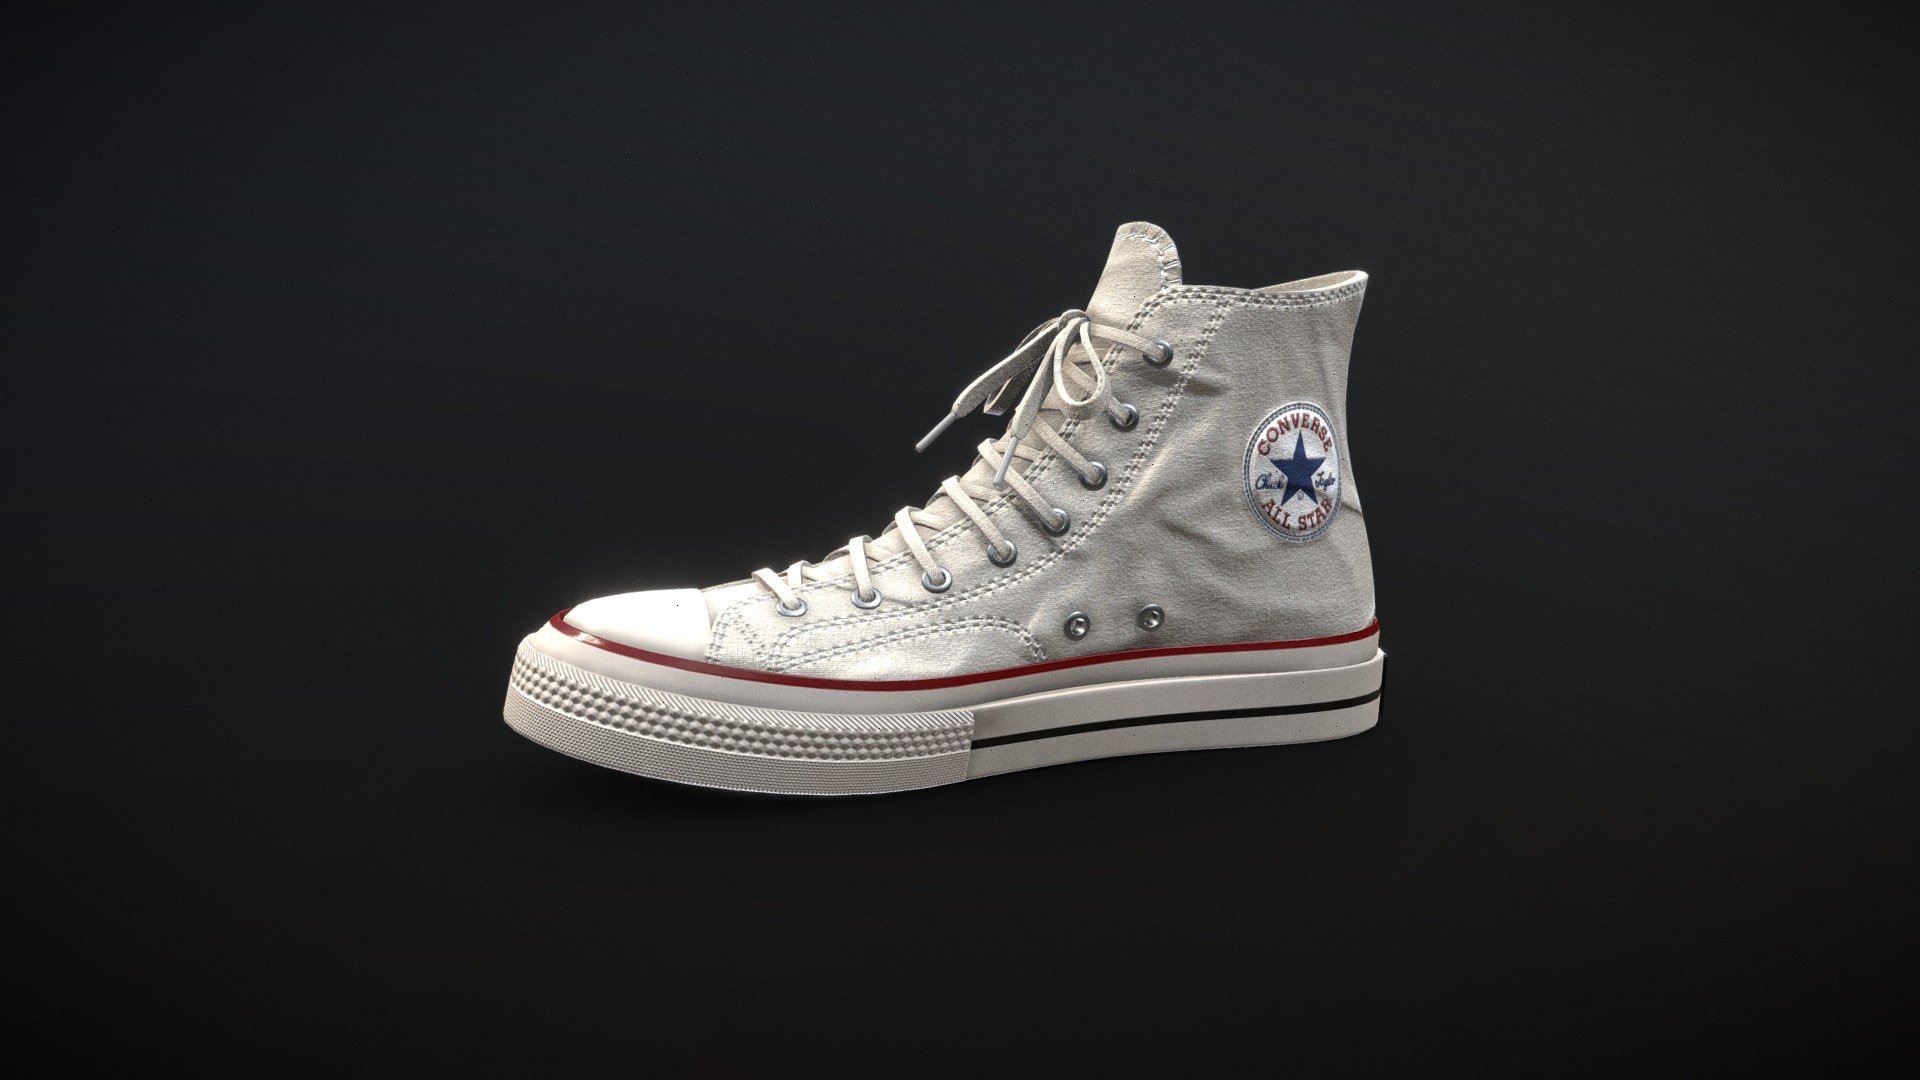 Converse Chuck Taylor All Star Vintage 70s

Game and production ready, polycount optimized for quality, ideal for high quality Characters and Close-Ups
Internal parts modeled and textured, ideal for customization or animation
Laces are continuous, no cuts behind the eyelets

Single UV space
PBR and UE4 4k Textures
Low Poly has 6.2k quads
FBX, OBJ, ZTL

2 Color variations - Converse Chuck Taylor All Star - Buy Royalty Free 3D model by Feds452 3d model